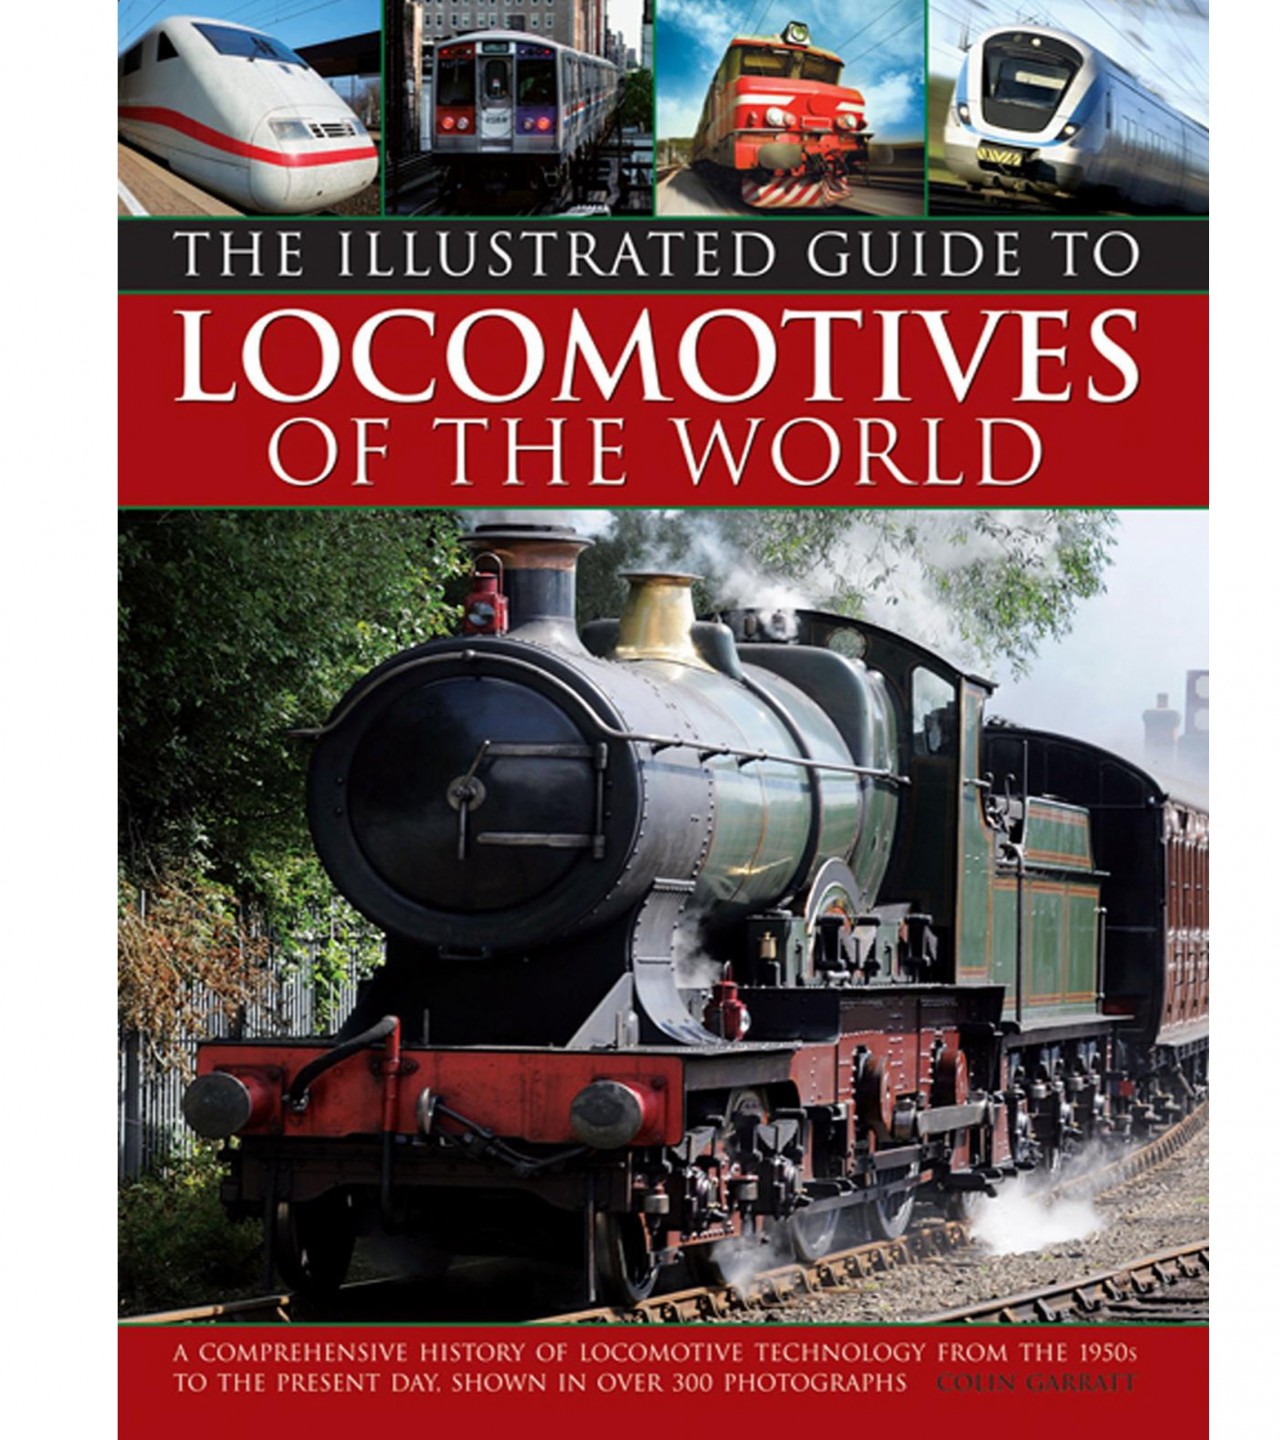 The Illustrated Guide To Trains Of The World